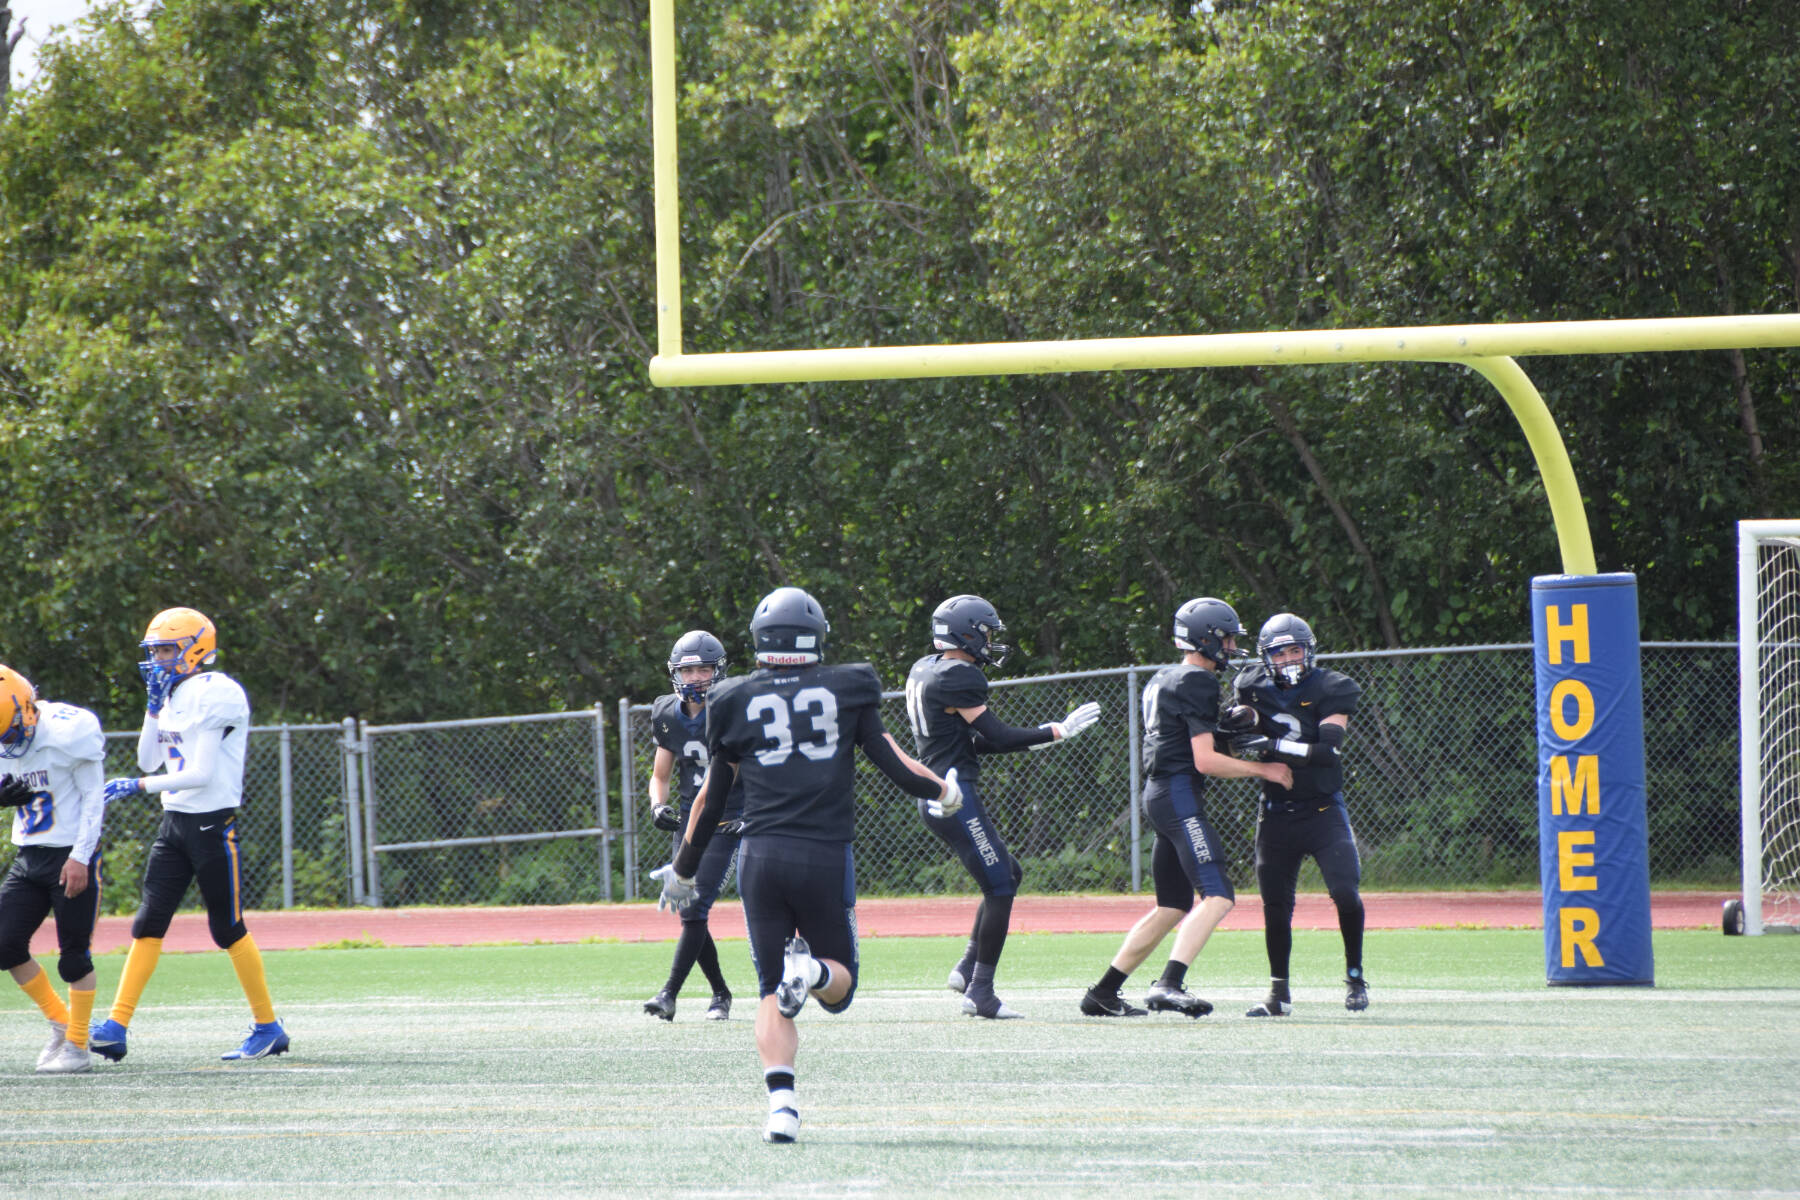 Chris Martishev’s teammates congratulate him after he caught a 58-yard pass from quarterback Preston Stanislaw, scoring a touchdown and bringing the Mariners’ score up to eight points in the first quarter of the home opener varsity game on Saturday, Aug. 12, 2023 in Homer, Alaska. (Delcenia Cosman/Homer News)